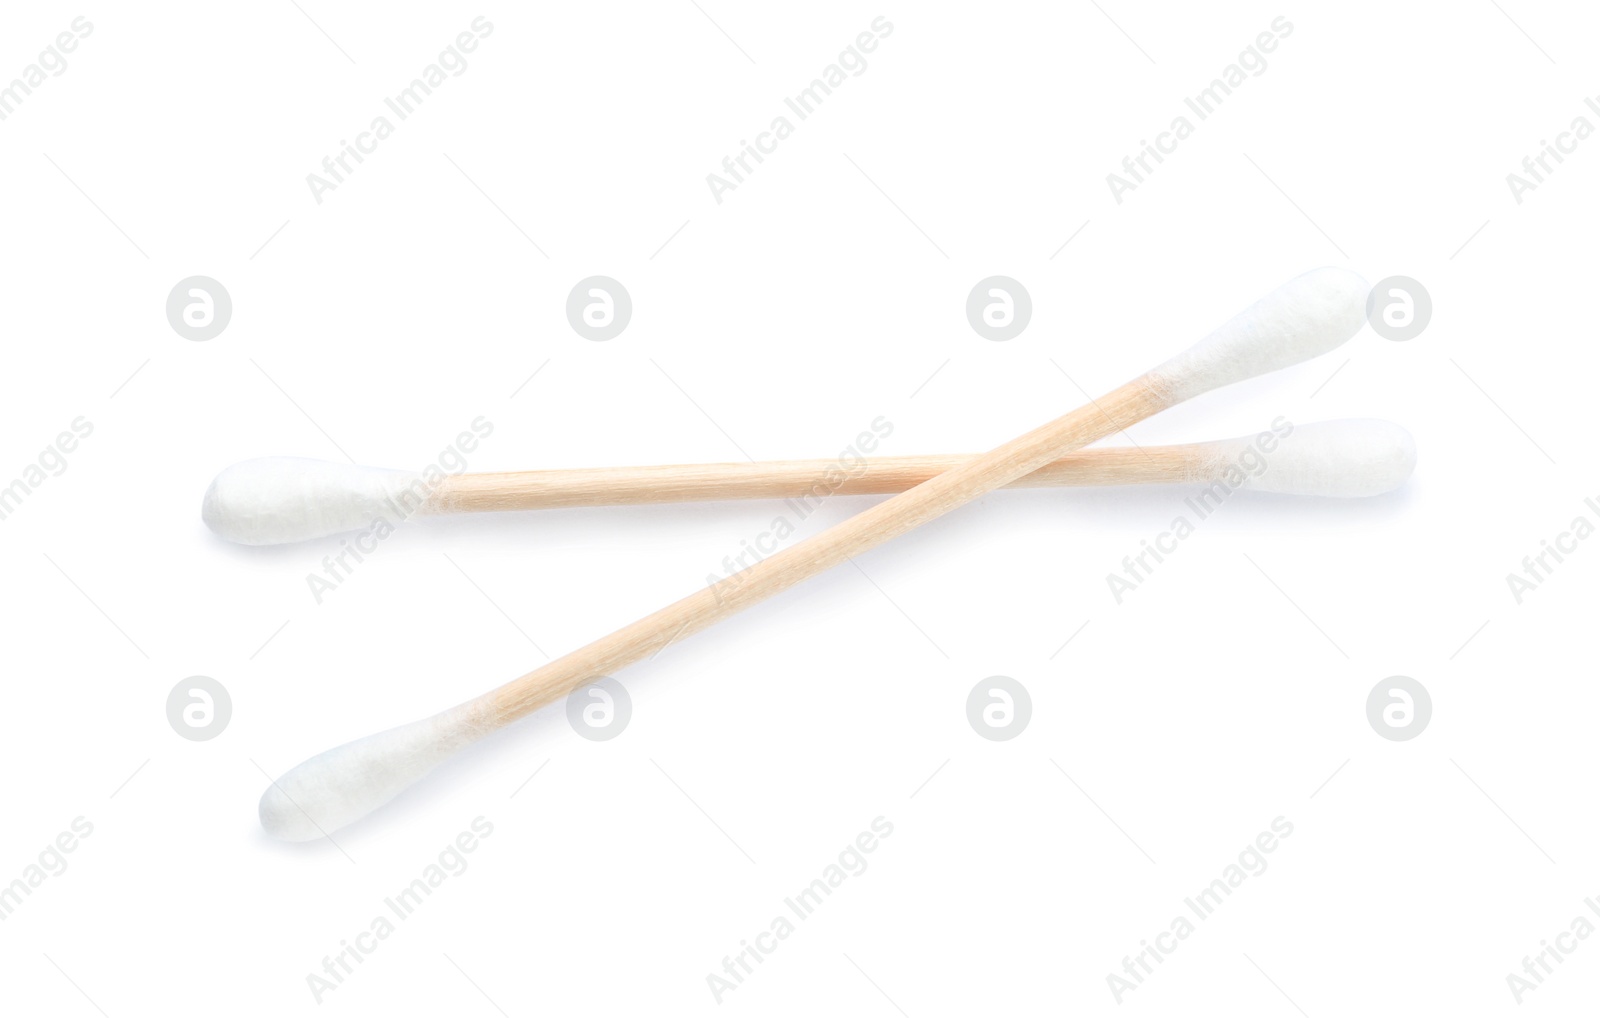 Photo of Wooden cotton swabs on white background. Hygienic accessory